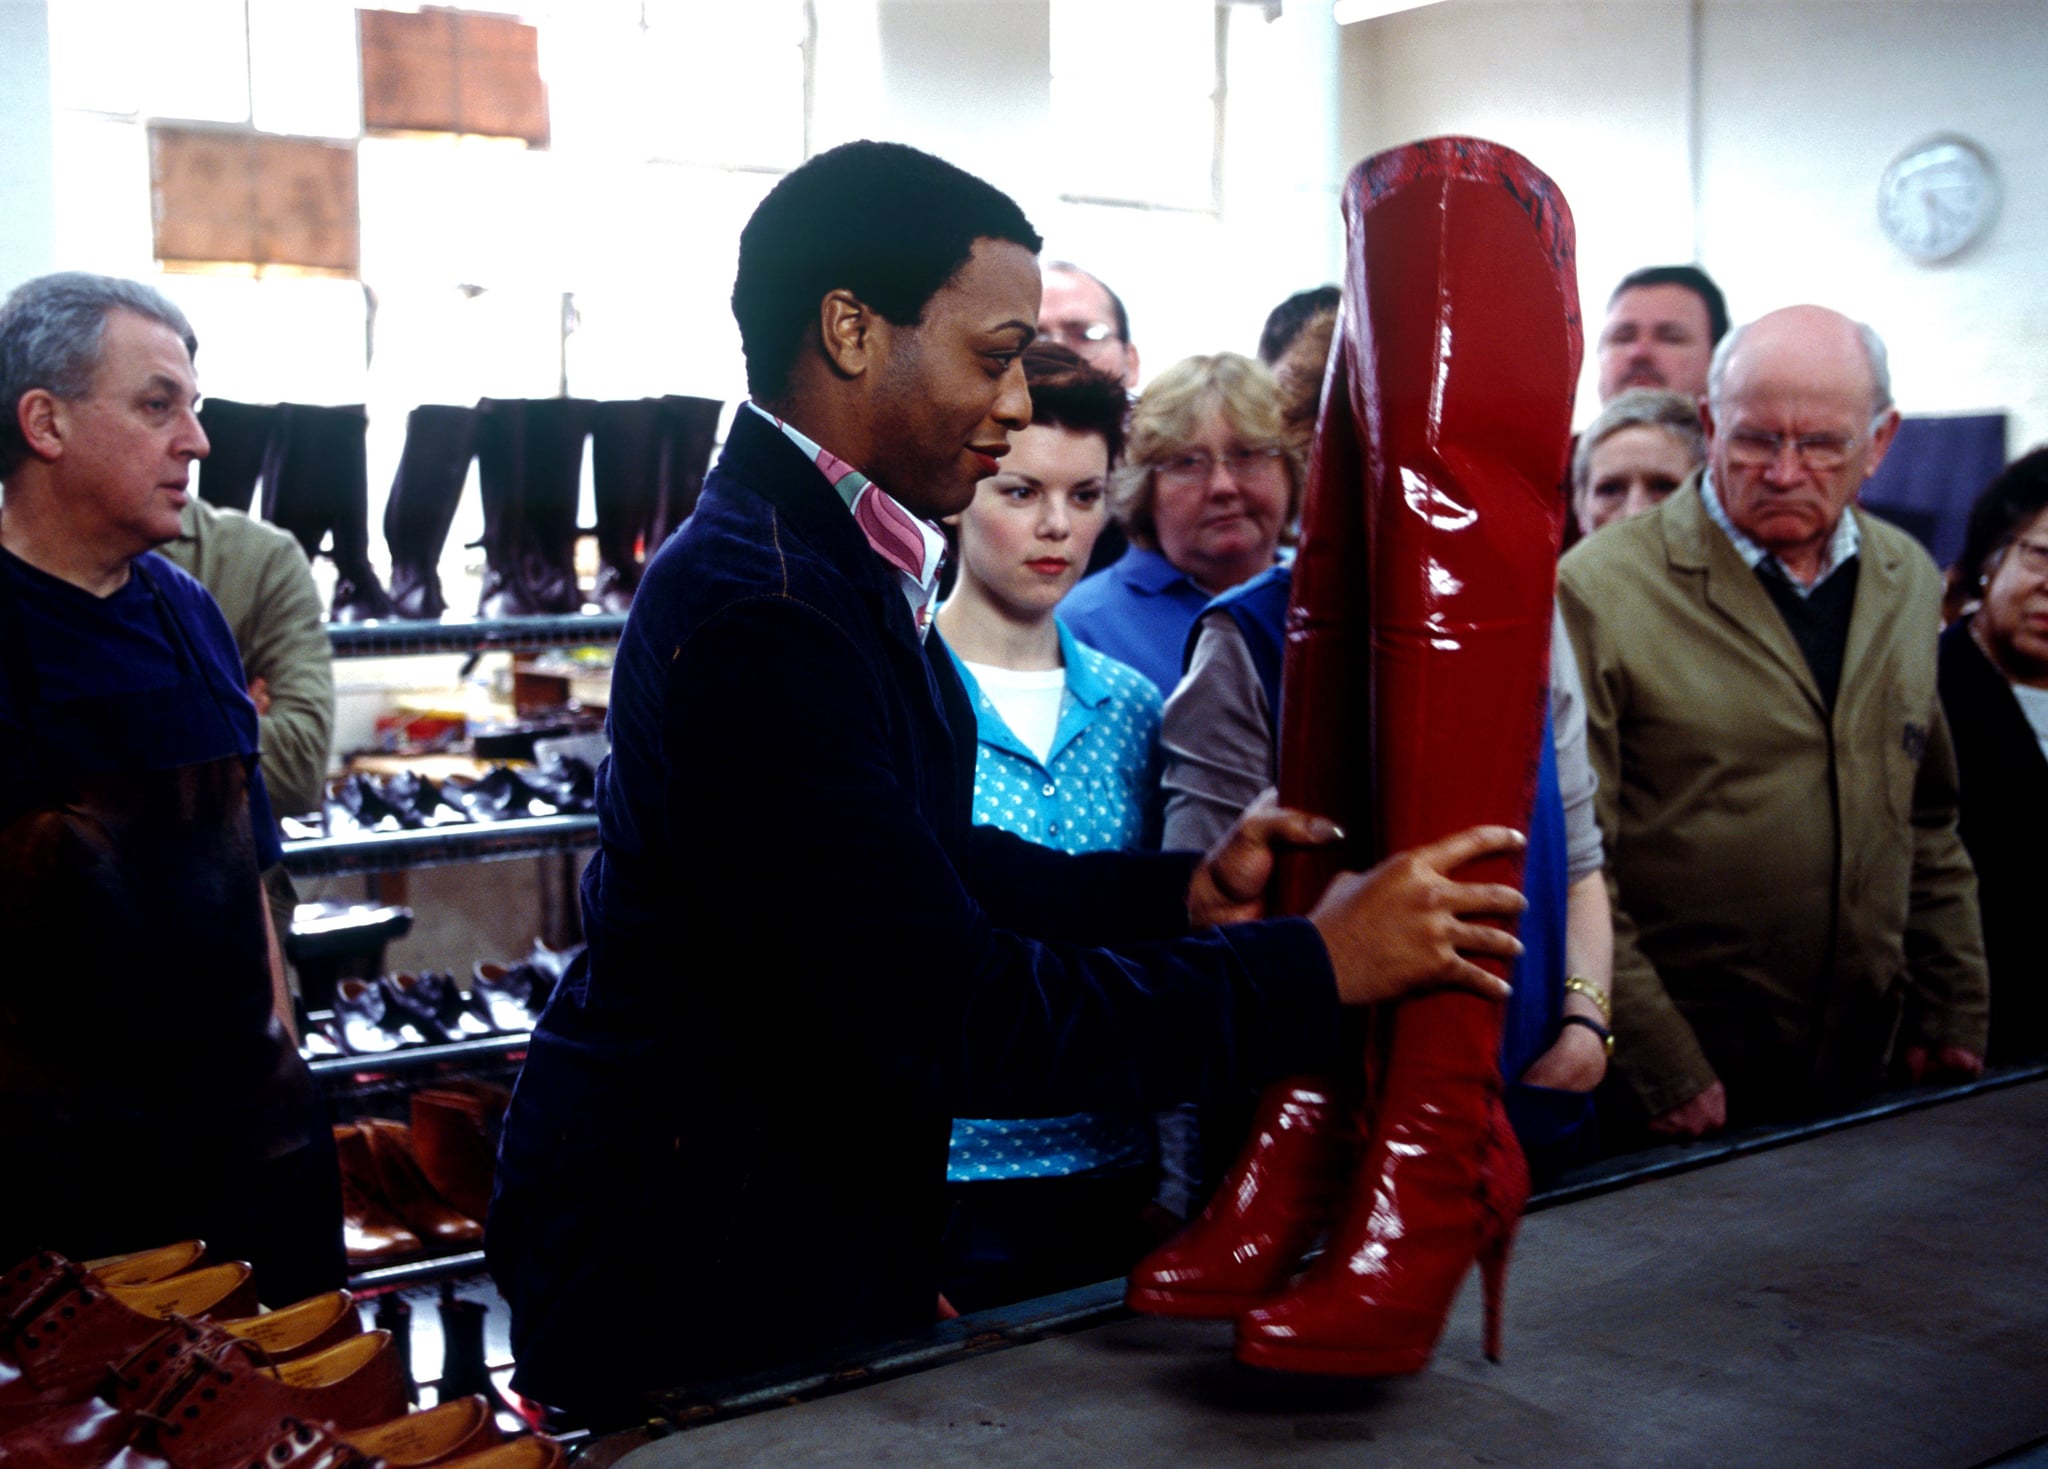 KINKY BOOTS, Chiwetel Ejiofor, Sara-Jane Potts, 2005, Buena Vista Pictures/courtesy Everett Collection